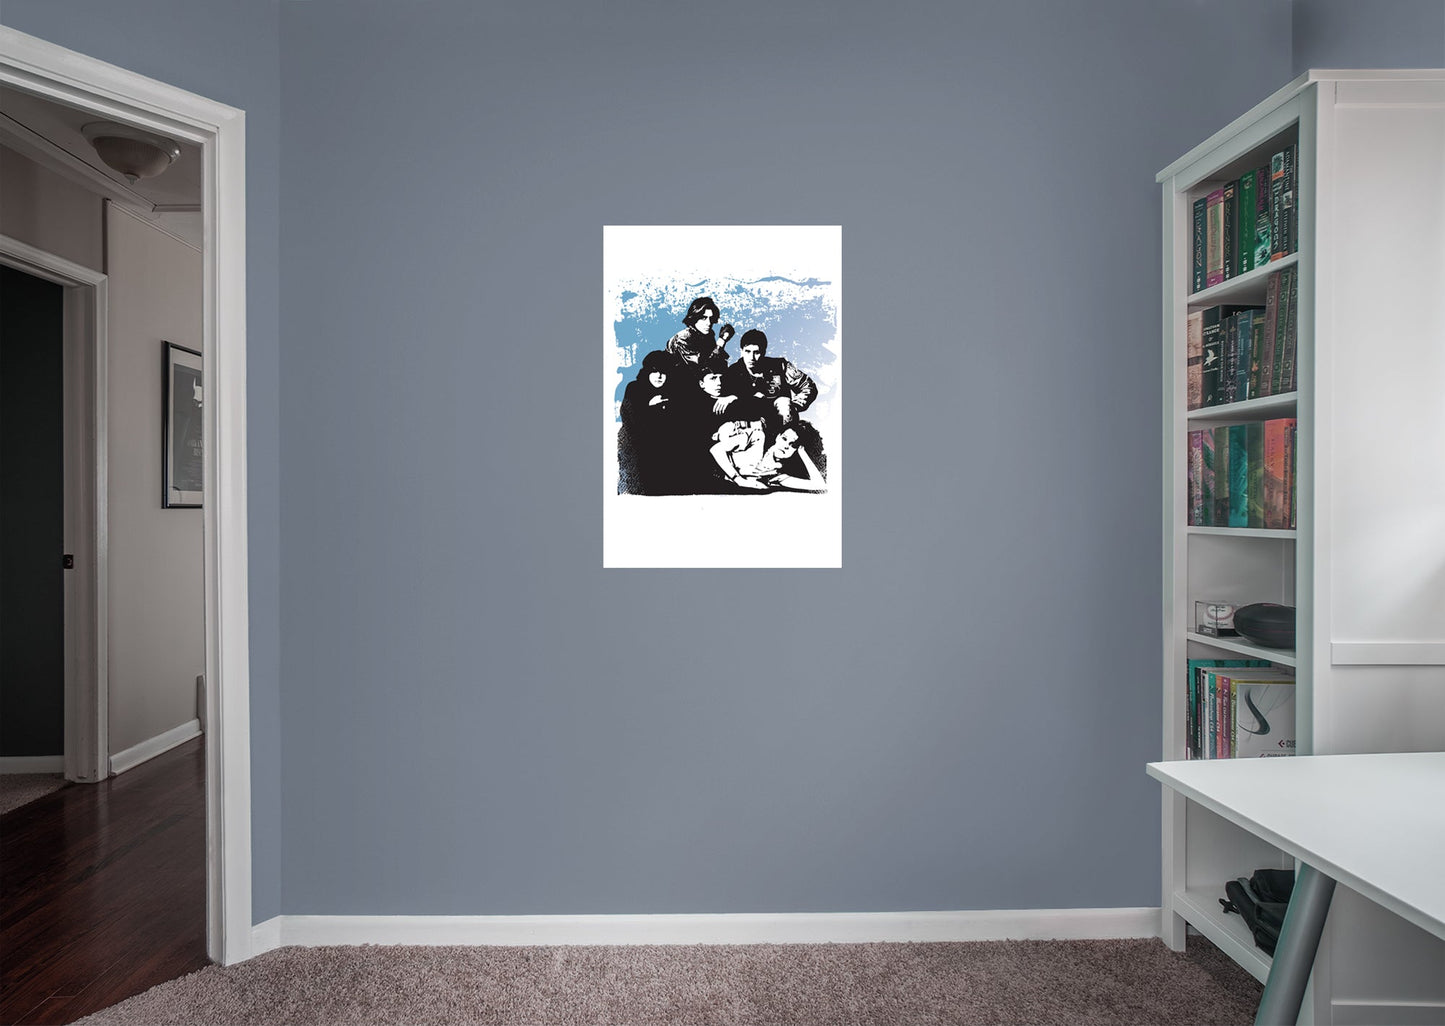 The Breakfast Club:  Group Poster Mural        - Officially Licensed NBC Universal Removable Wall   Adhesive Decal